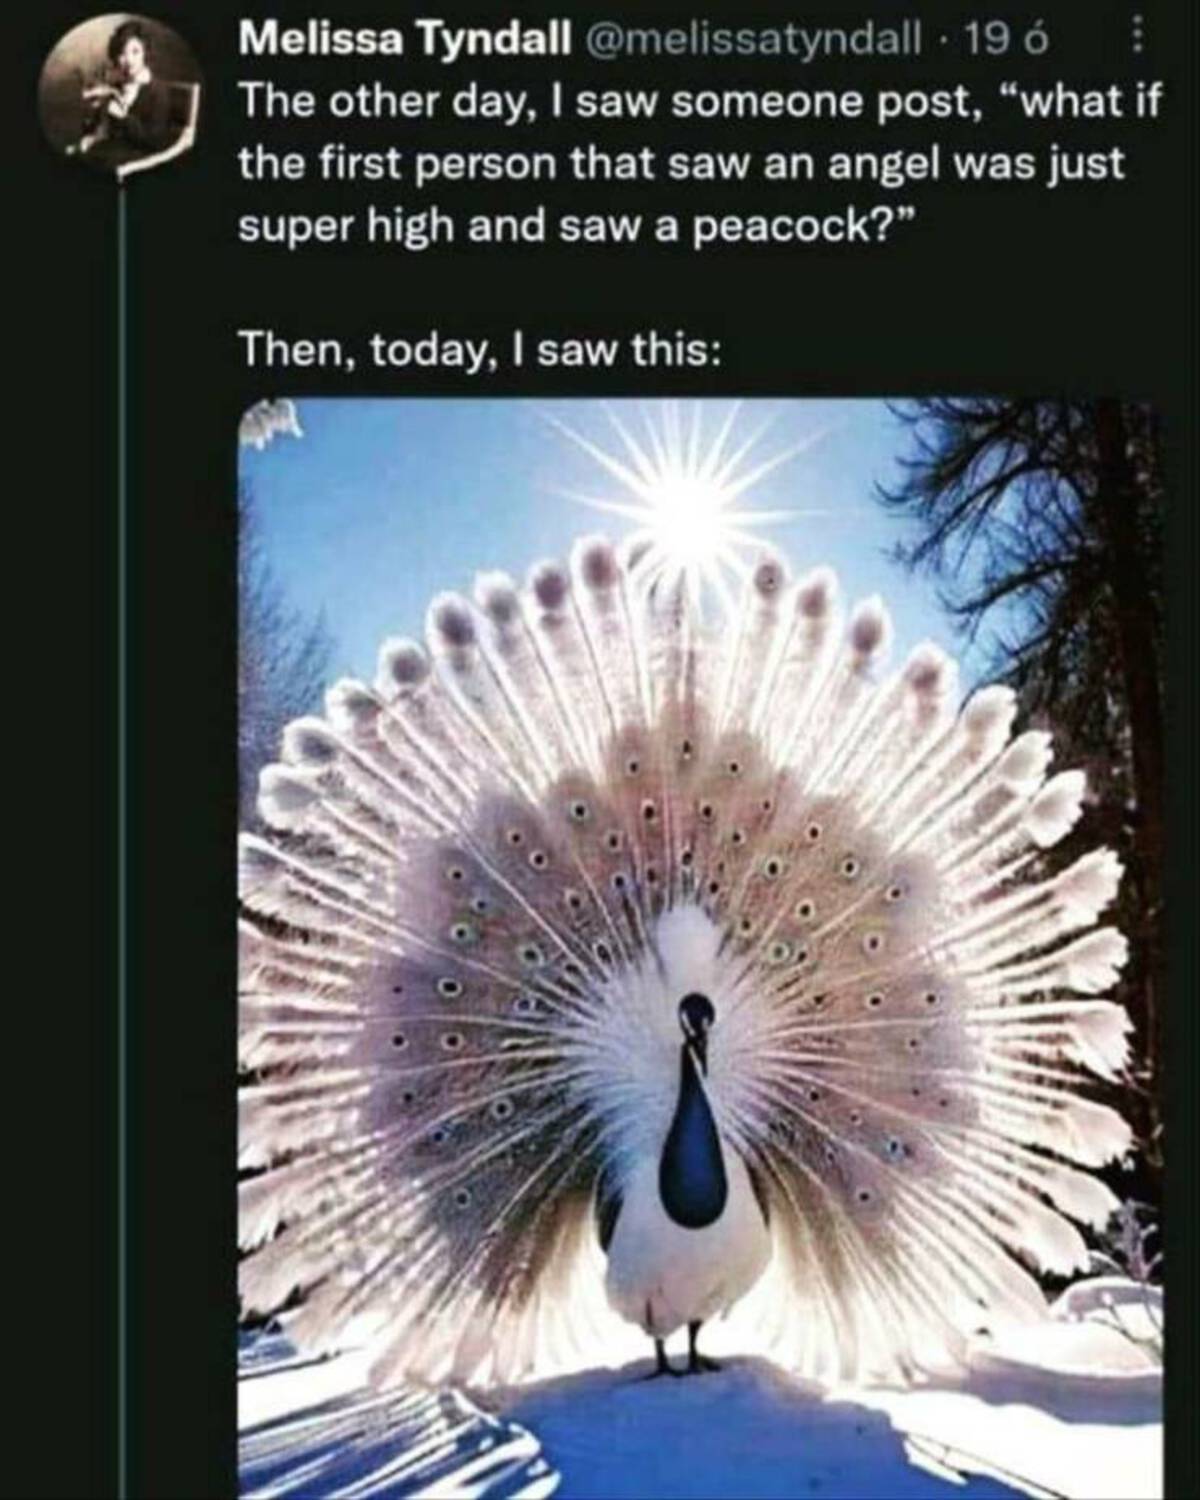 peacock be not afraid - Melissa Tyndall 19 The other day, I saw someone post, "what if the first person that saw an angel was just super high and saw a peacock?" Then, today, I saw this